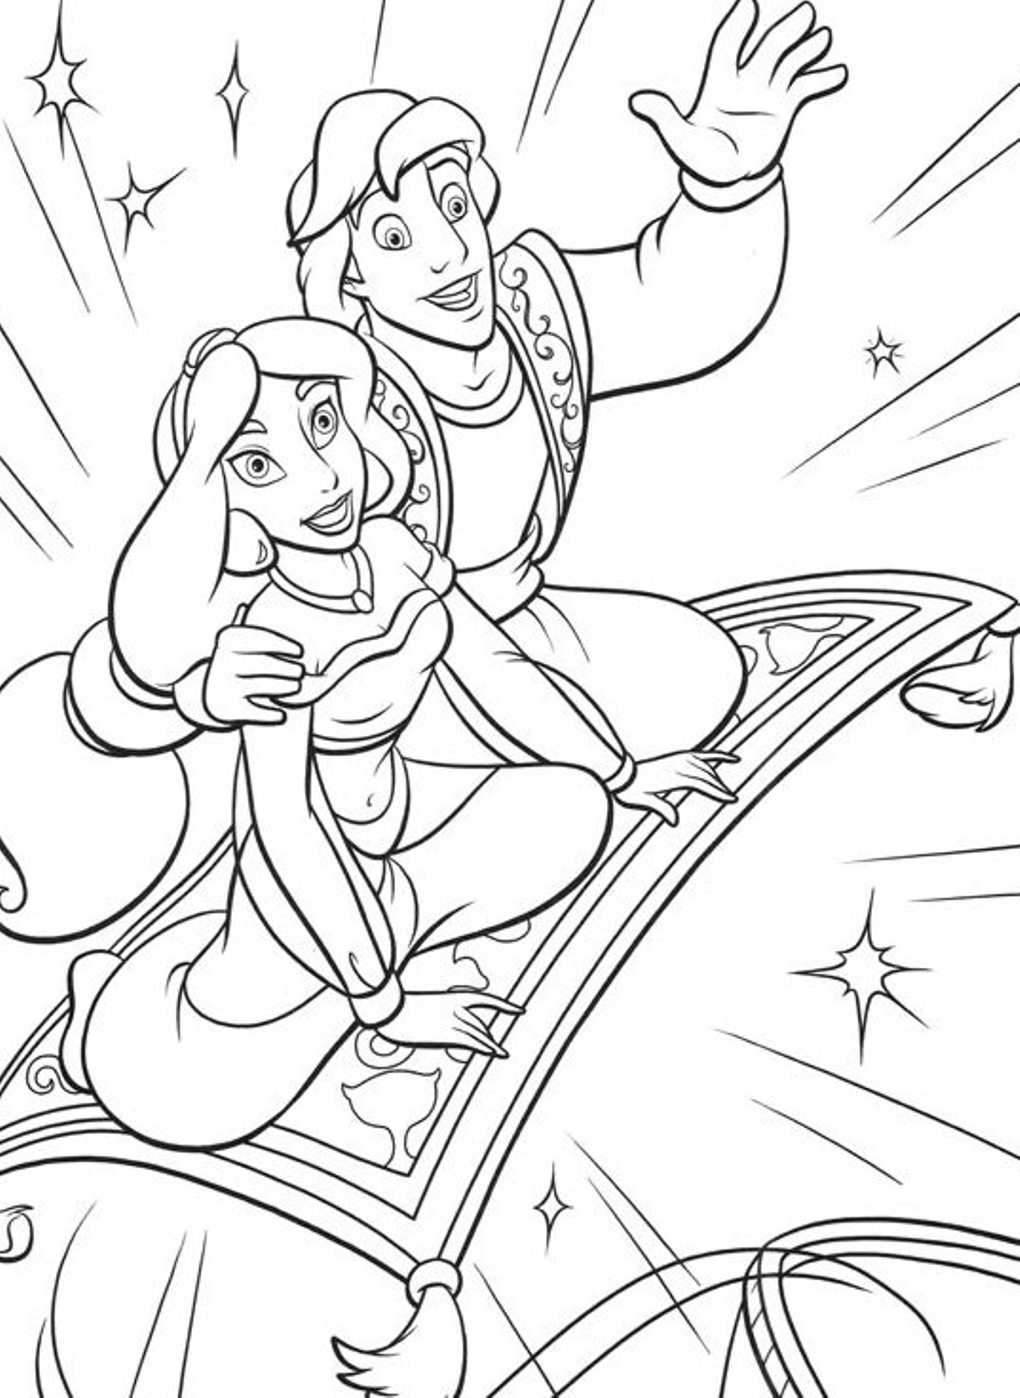 580  Jasmine Cartoon Coloring Pages  Latest Free